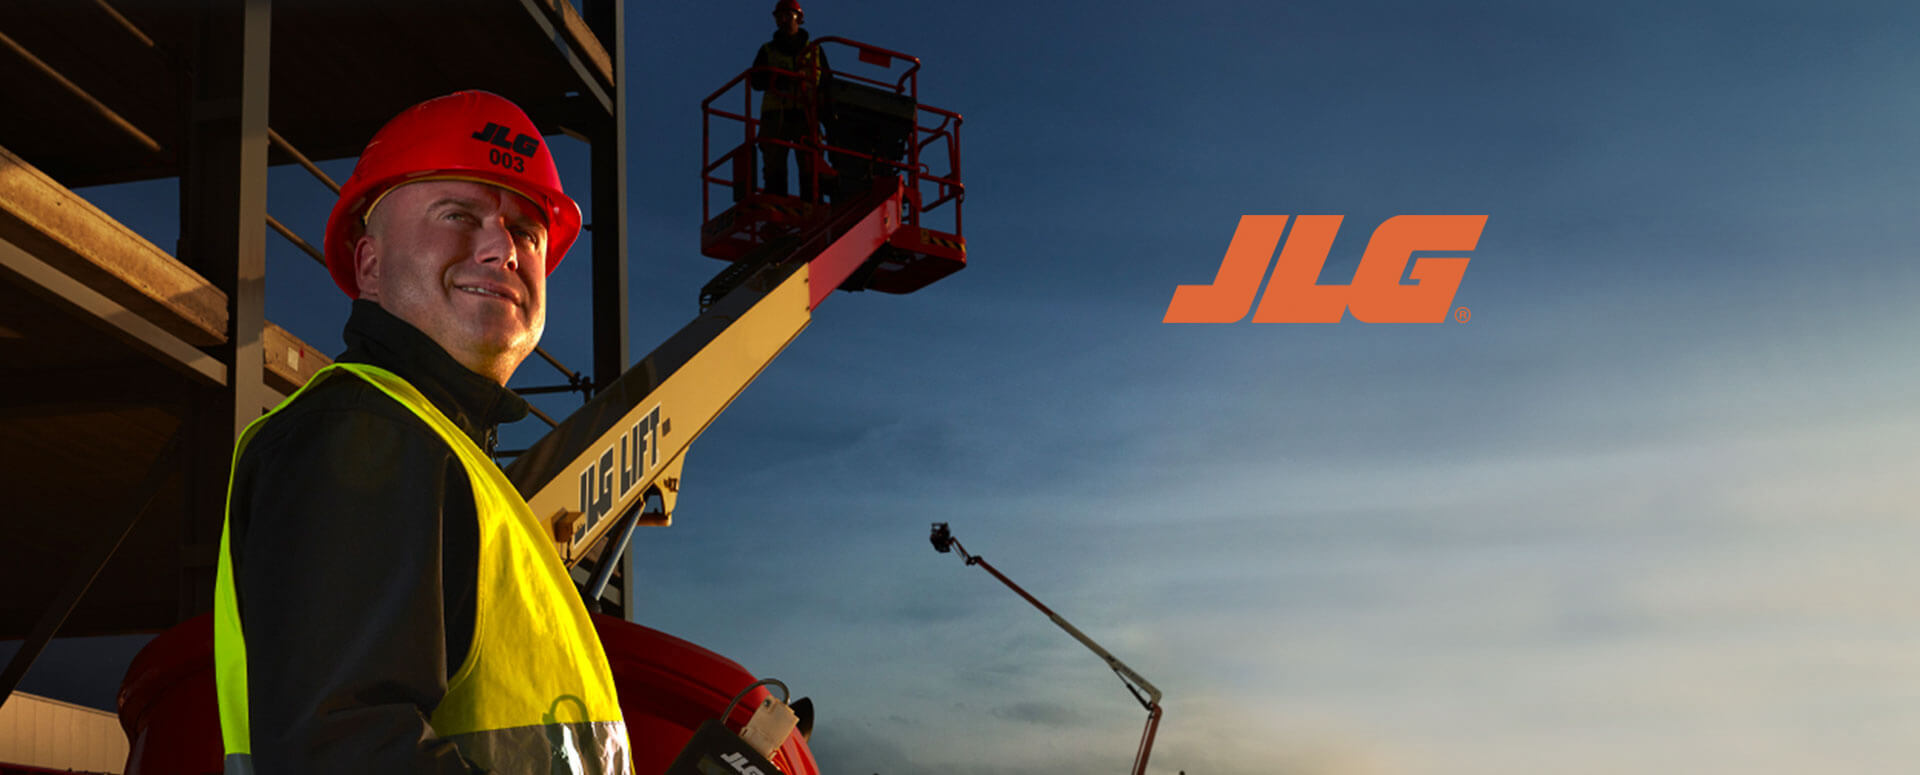 About JLG Industries, Inc